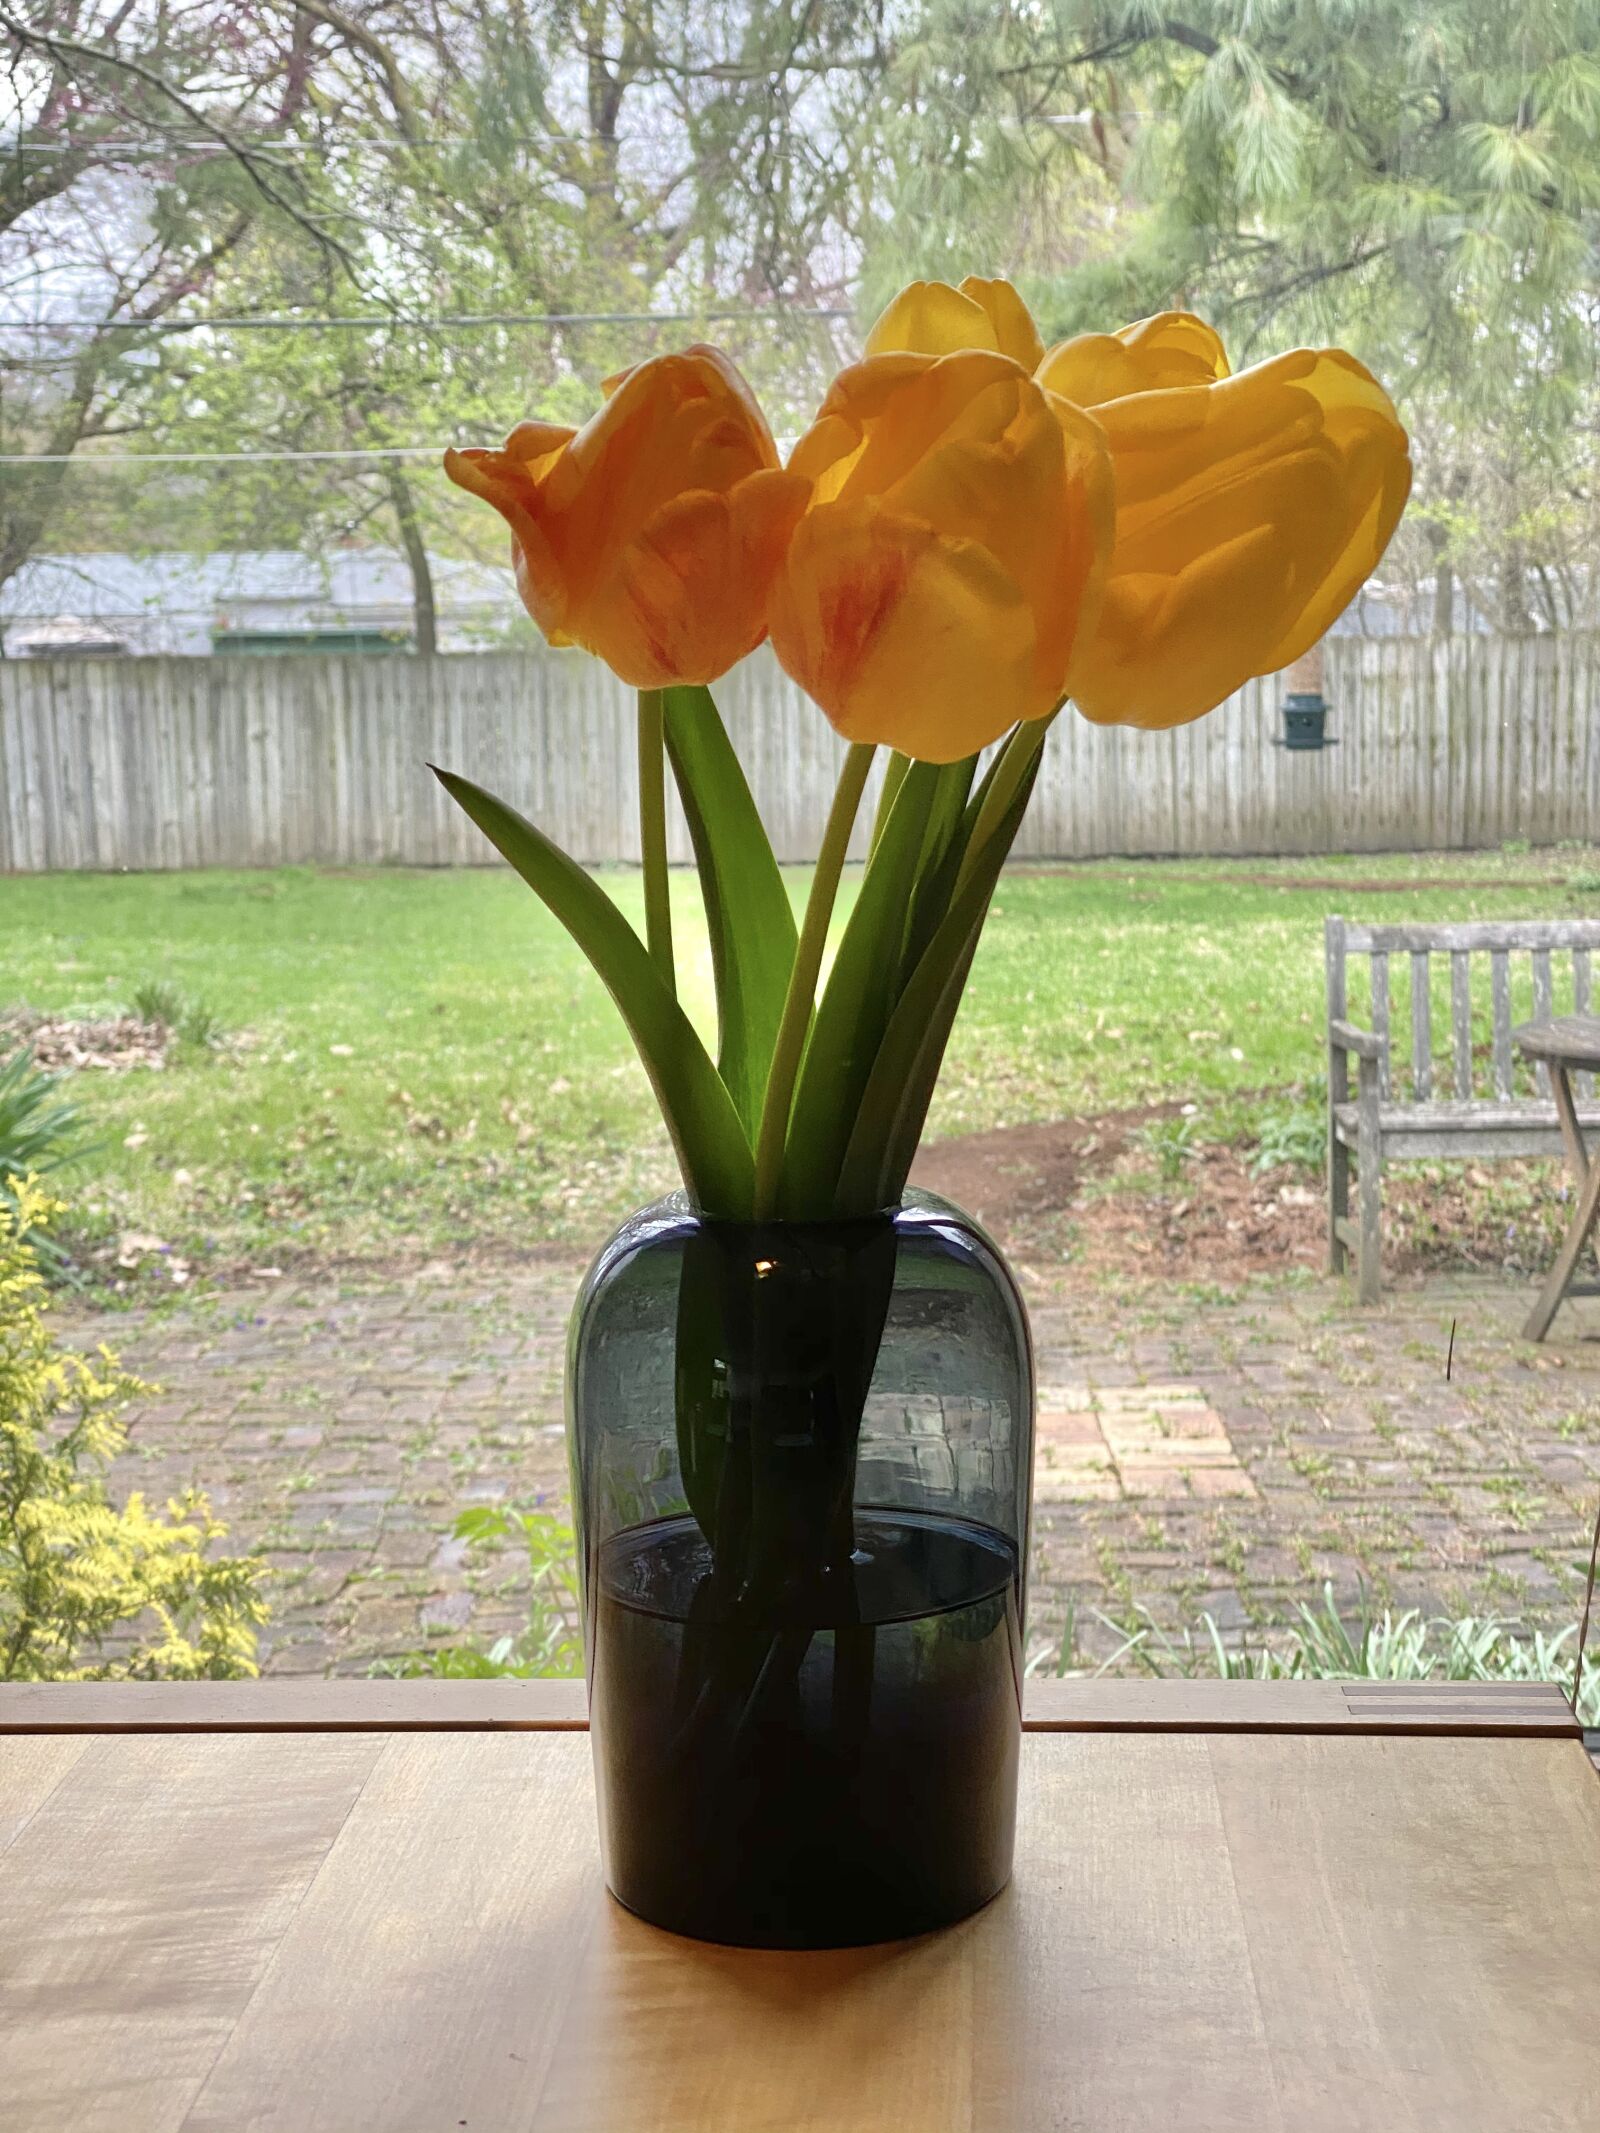 Apple iPhone 11 Pro + iPhone 11 Pro back triple camera 6mm f/2 sample photo. Tulips, flowers, alone photography